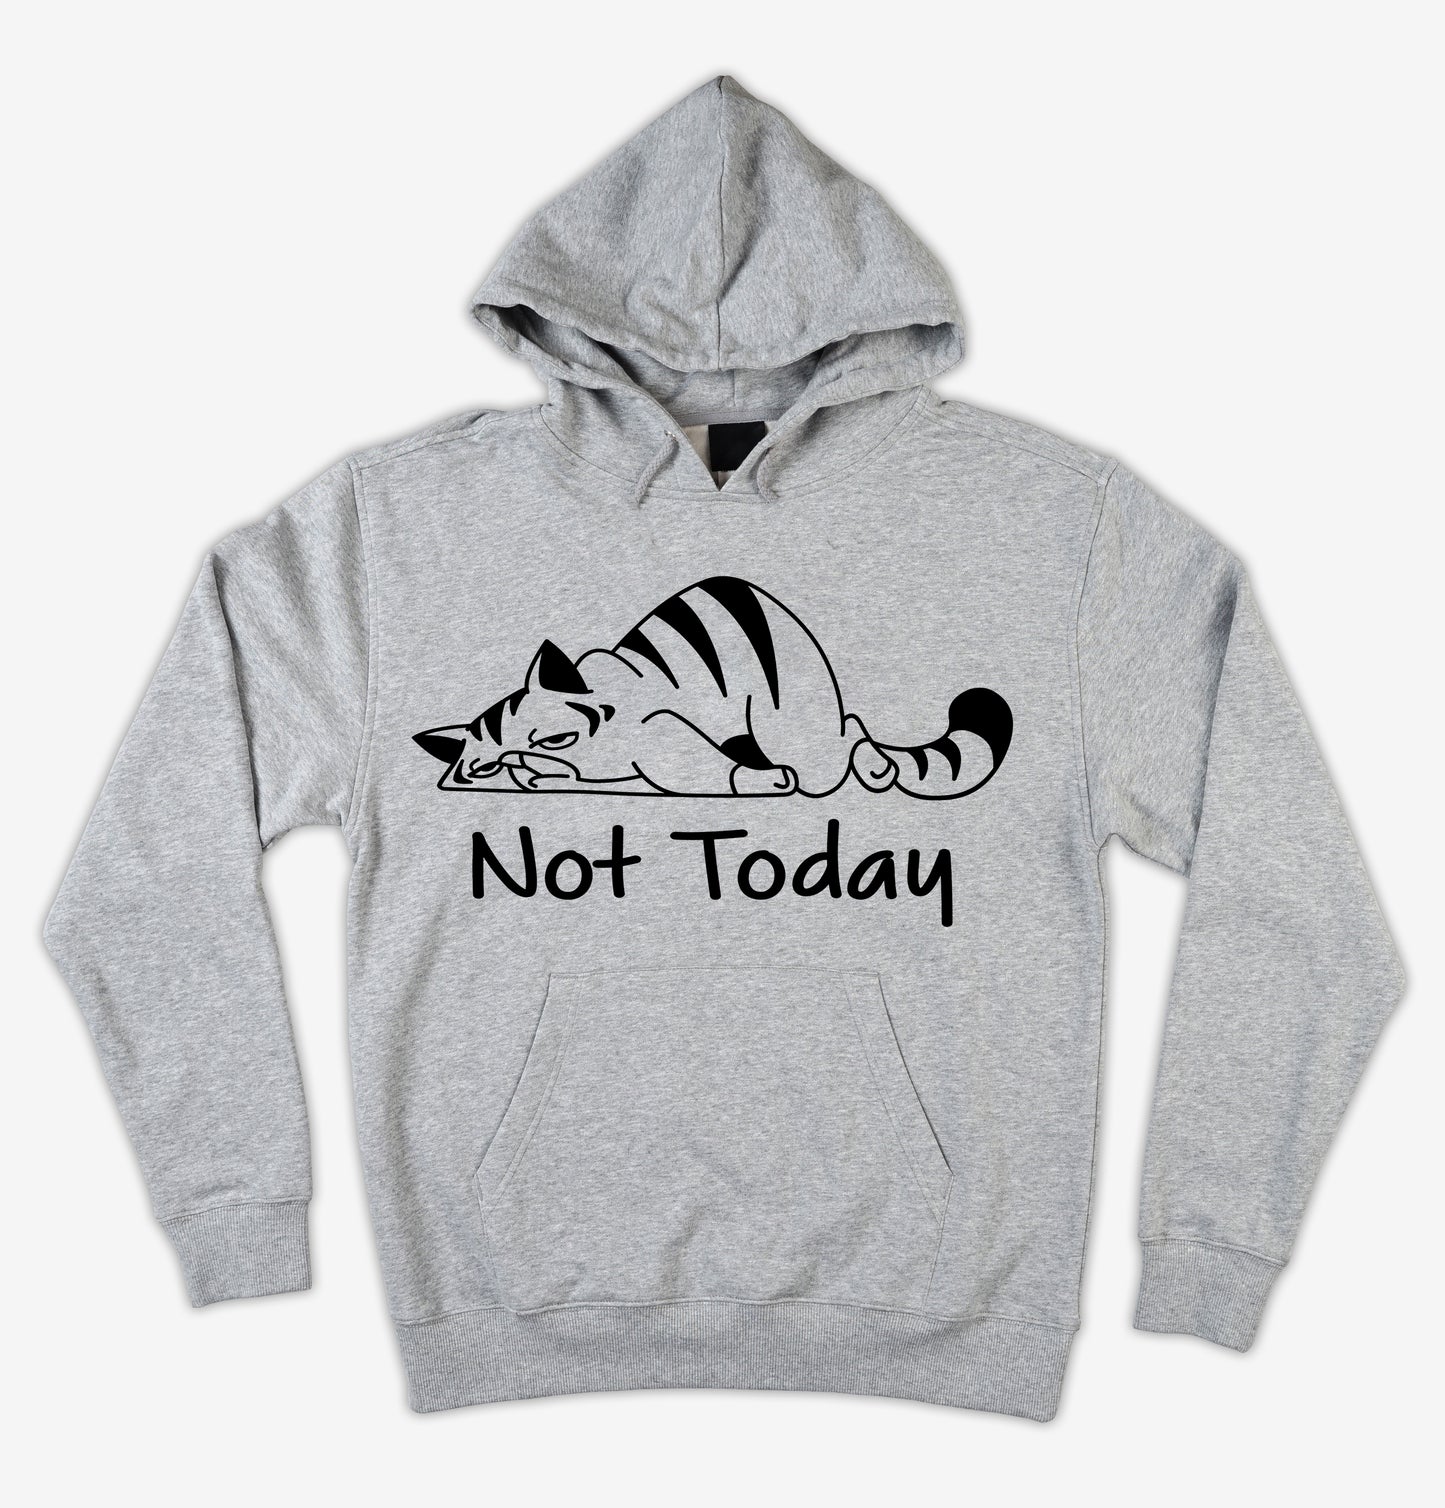 NOT TODAY - hoodie - grey or pink - fundraiser for Furry Fix - $35 - shipping or pick up.